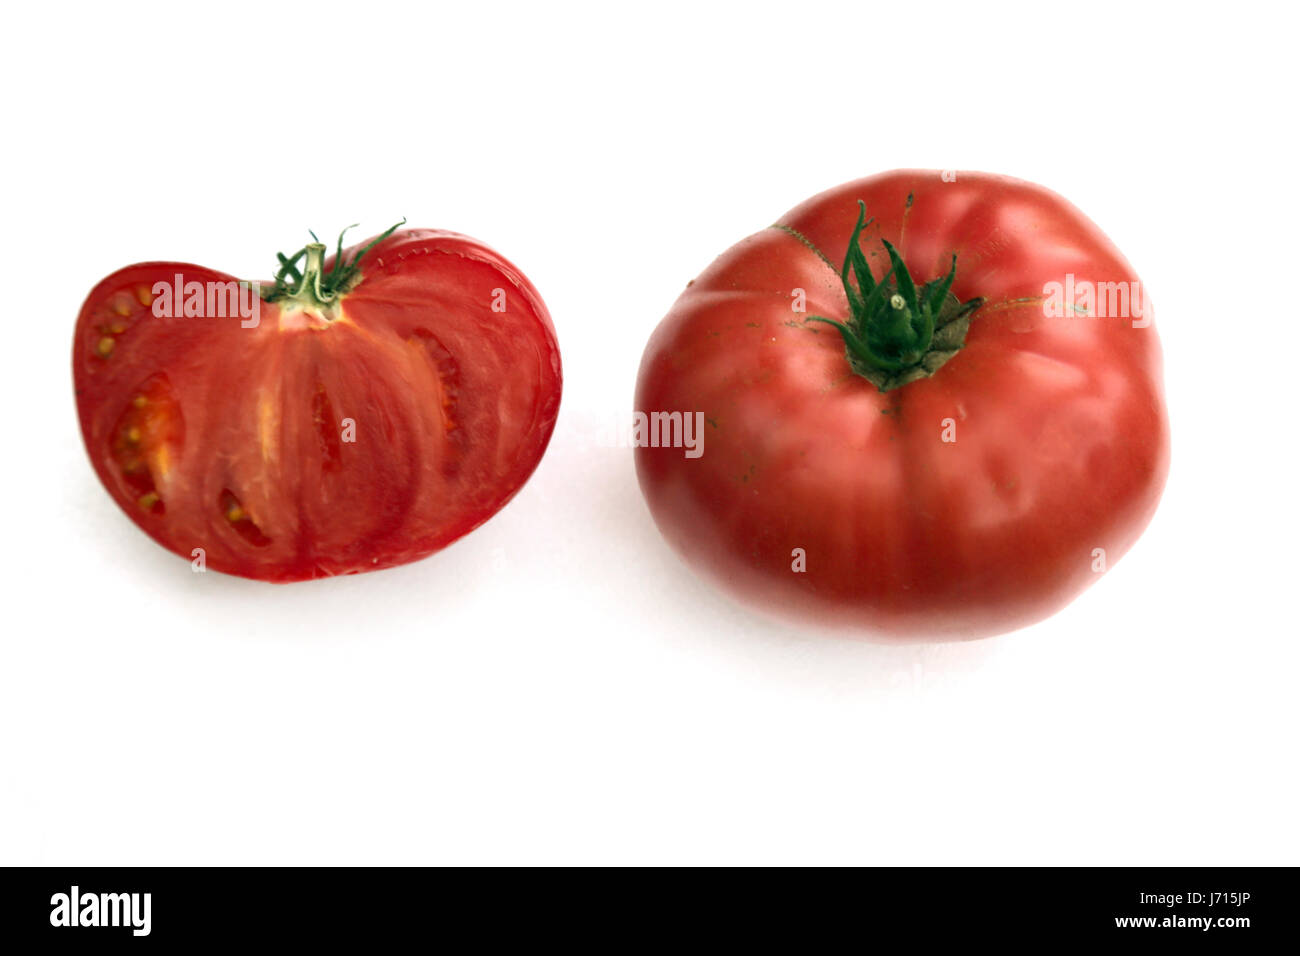 One half of a large tomato and a whole tomato Stock Photo